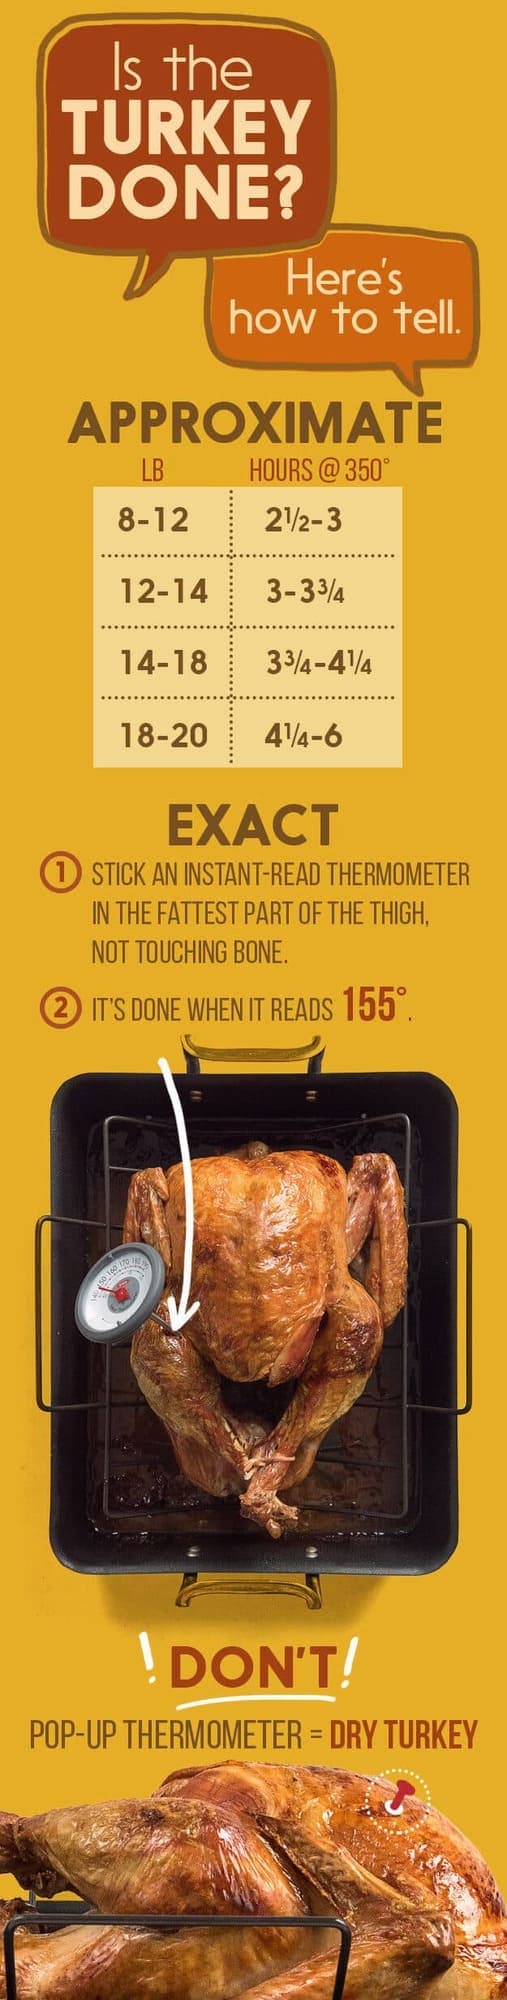 Is the Turkey Done by Buzzfeed